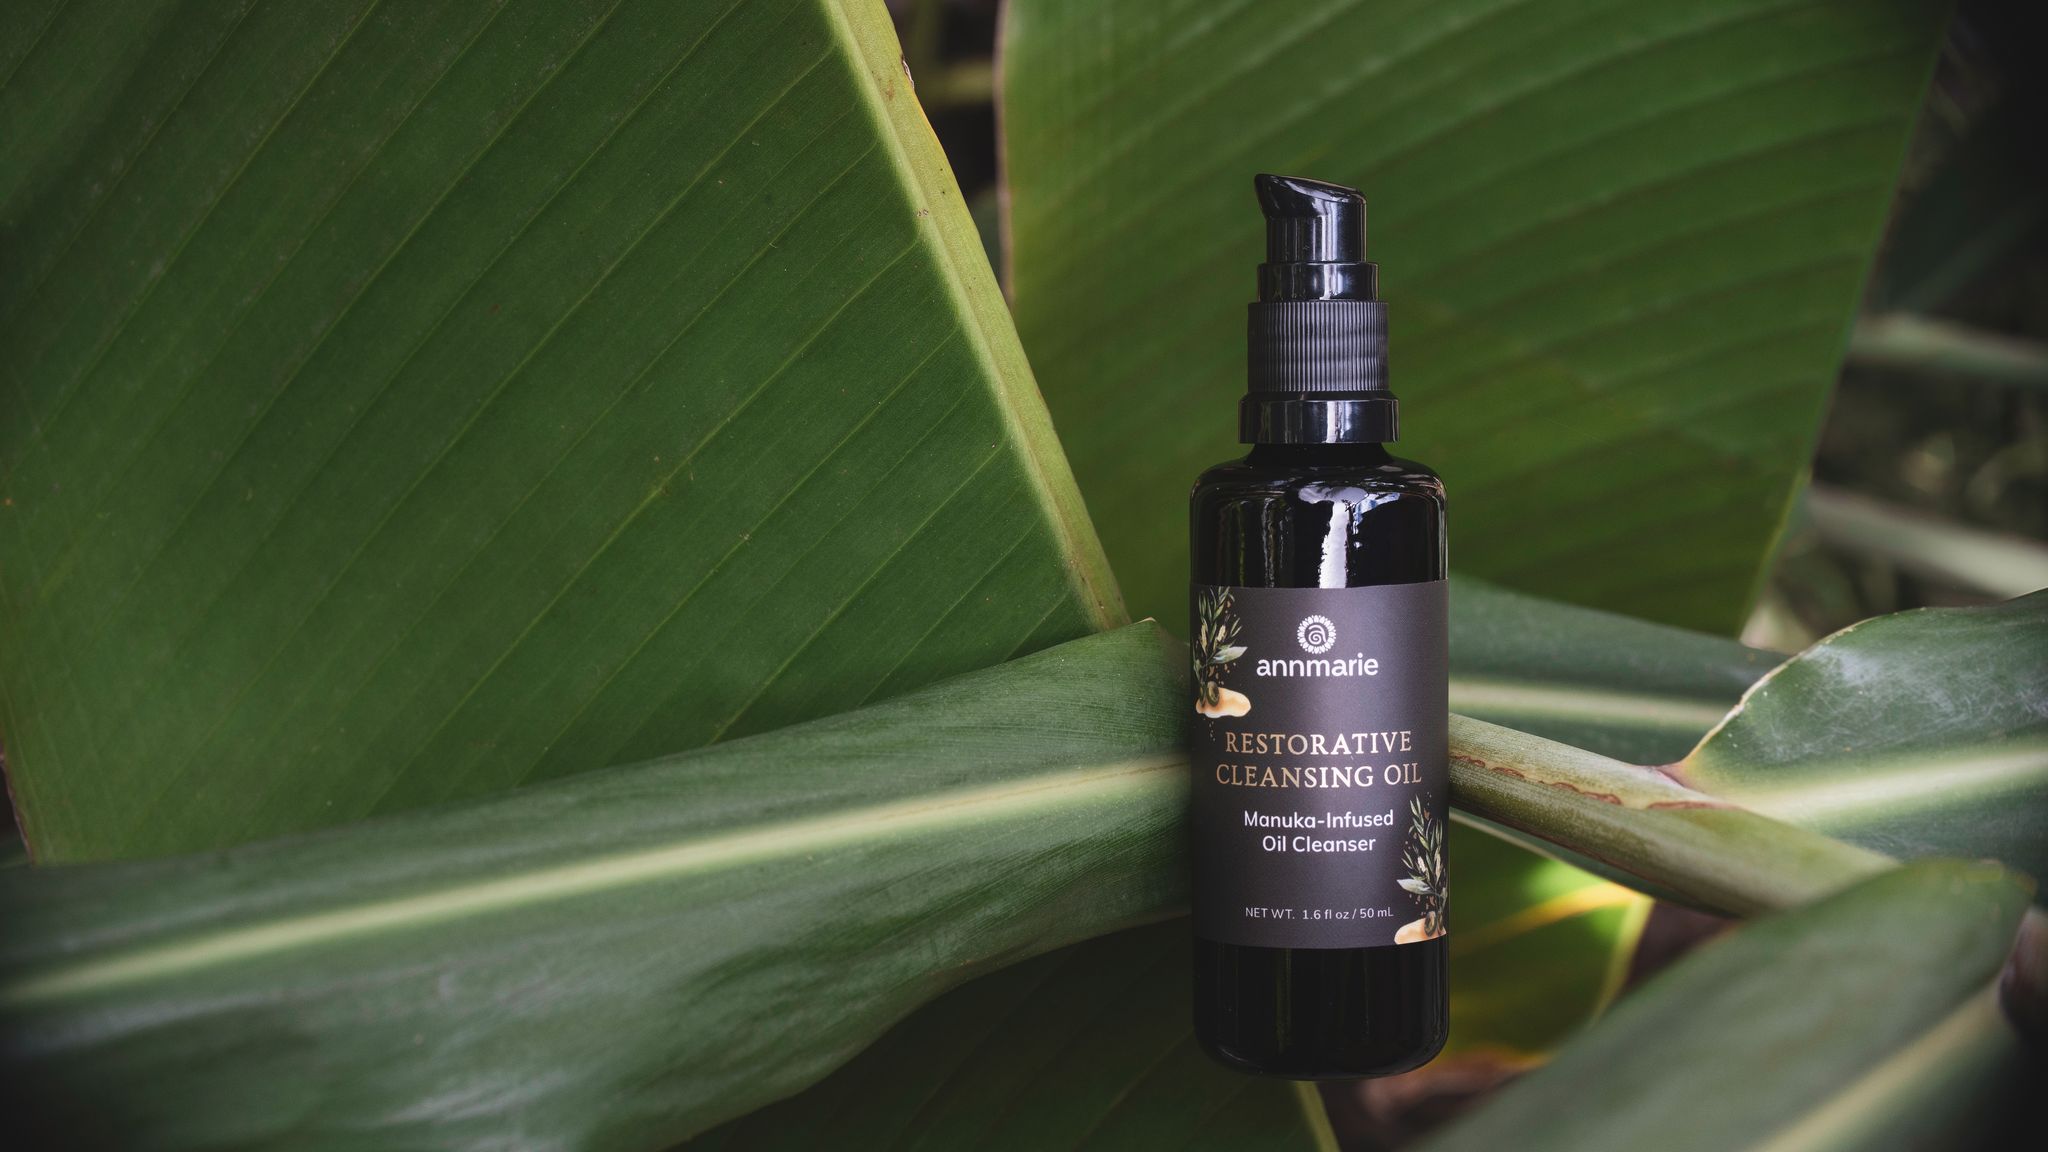 Restorative Cleansing Oil from Annmarie is suitable for all skin types.